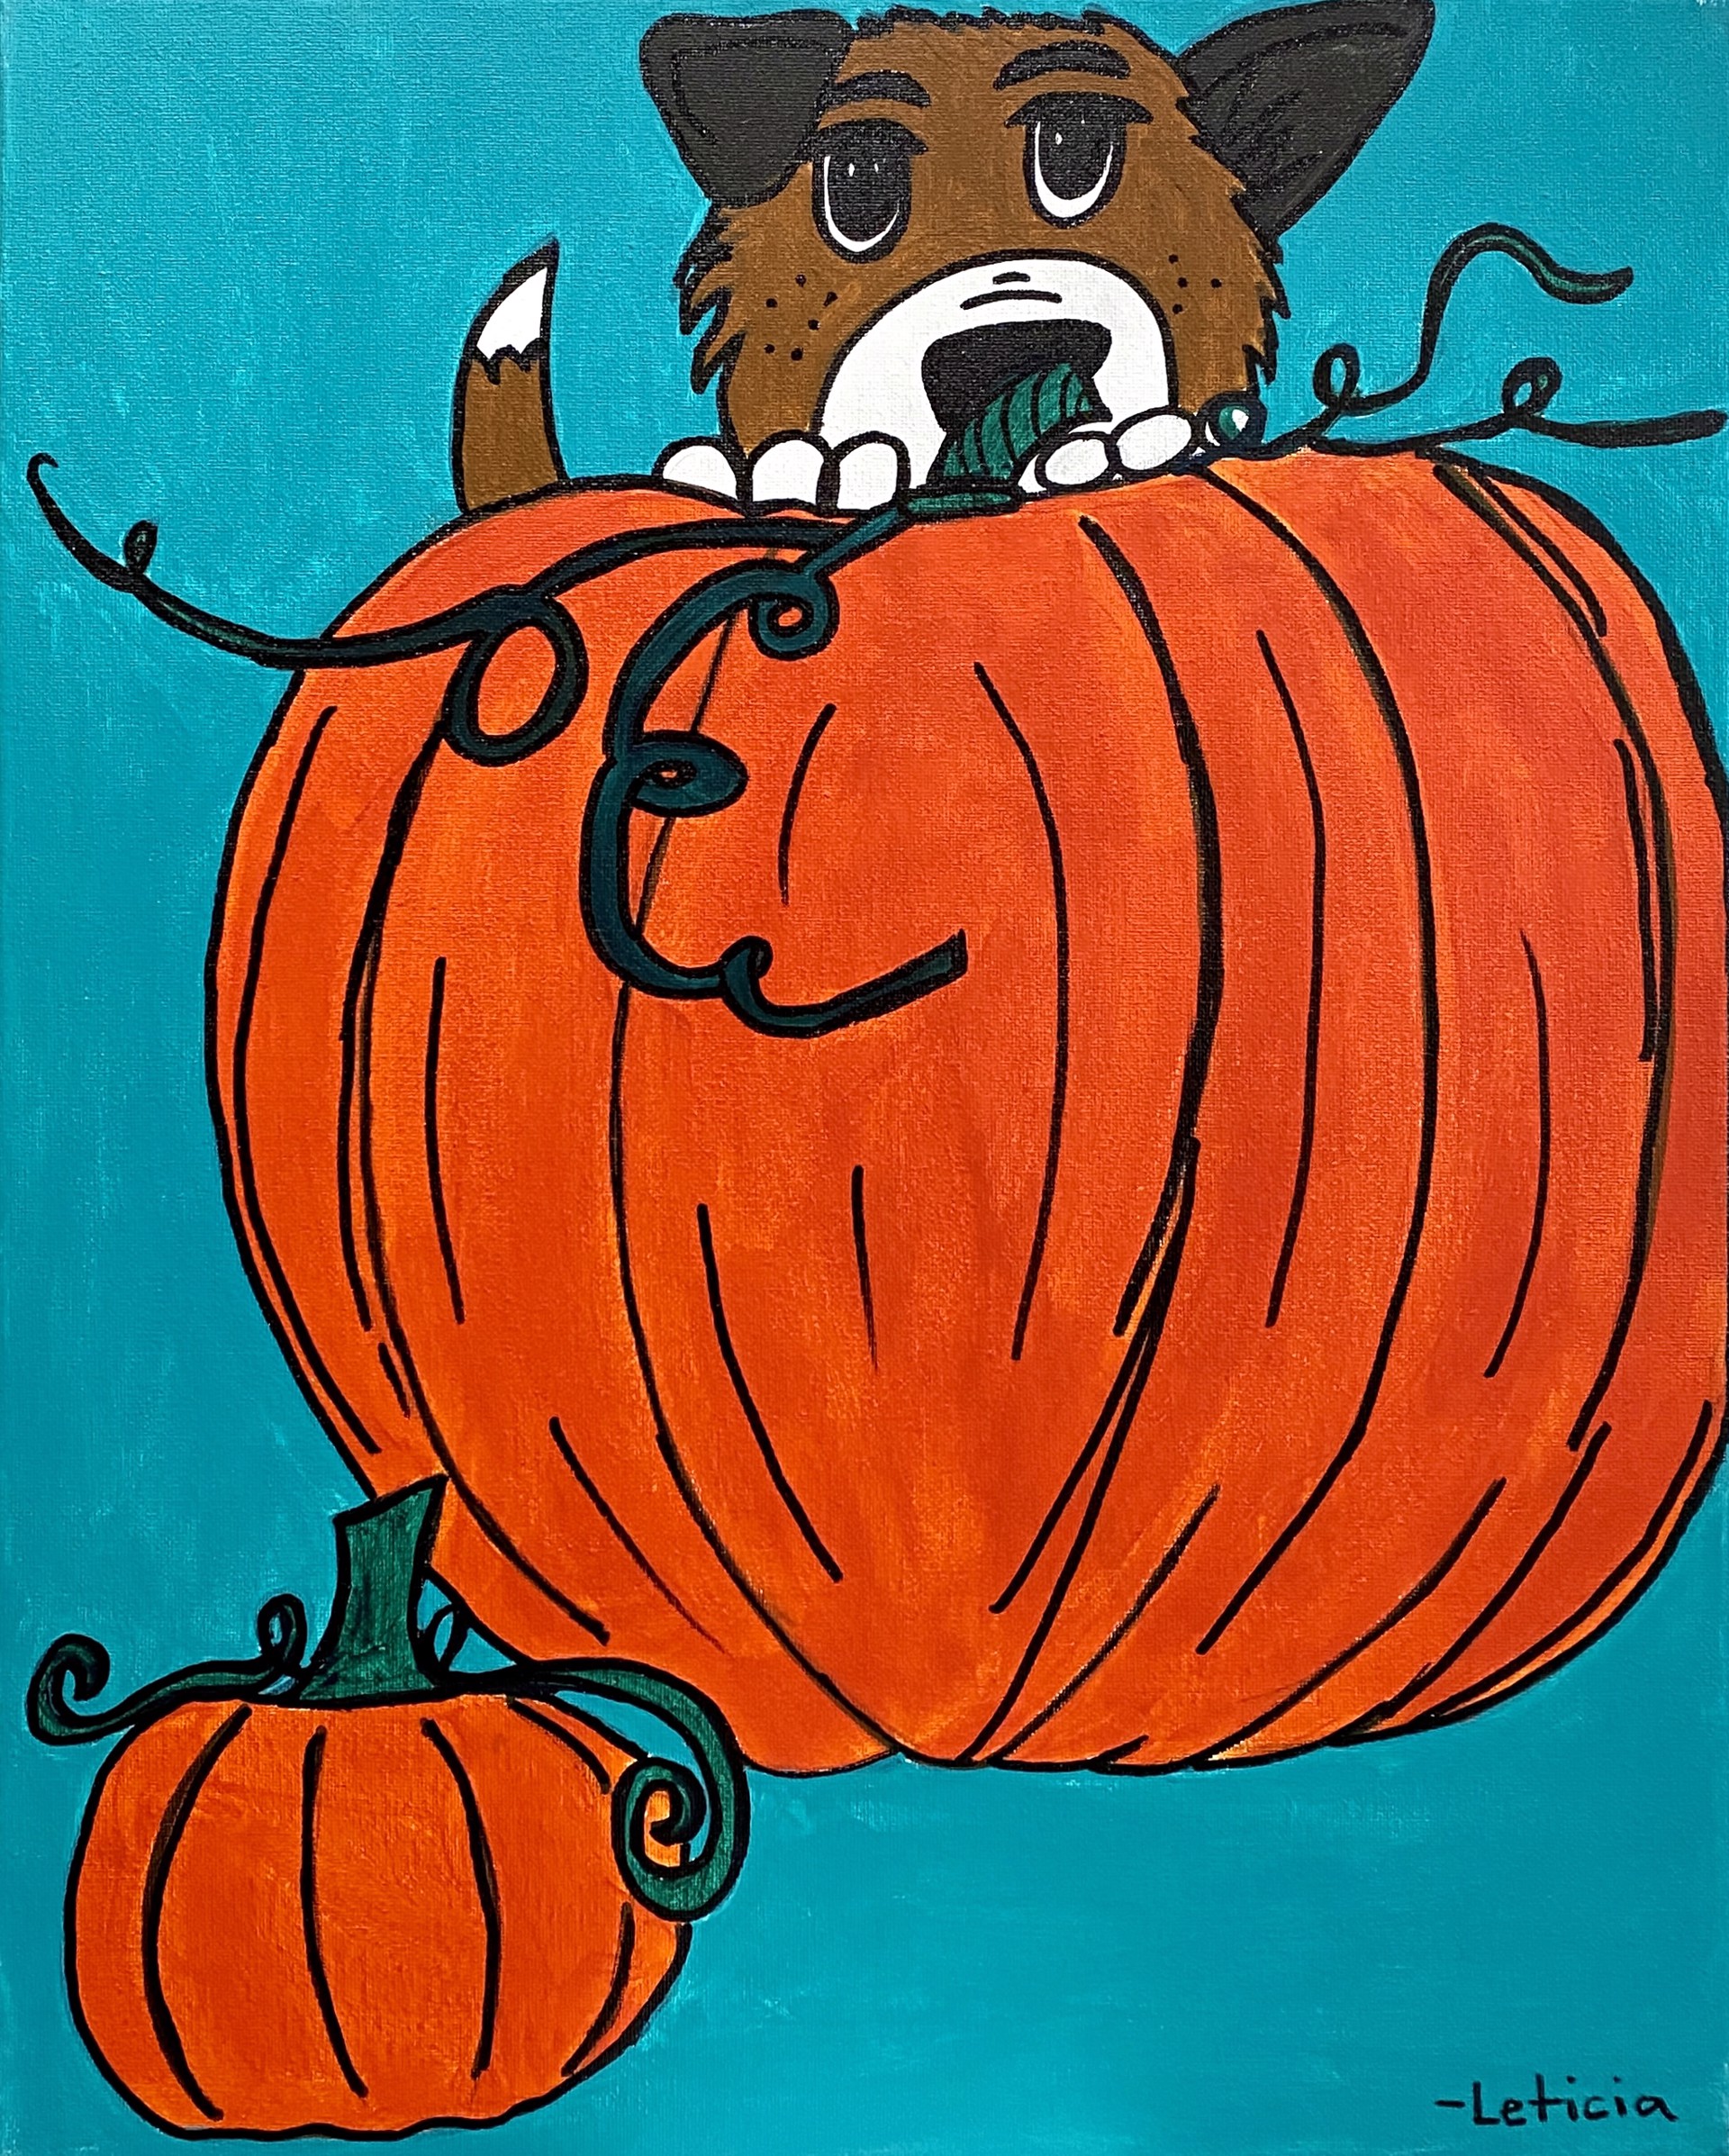 "Pumpkin Pup" by Leticia (One Step Beyond) by Art One Foundation